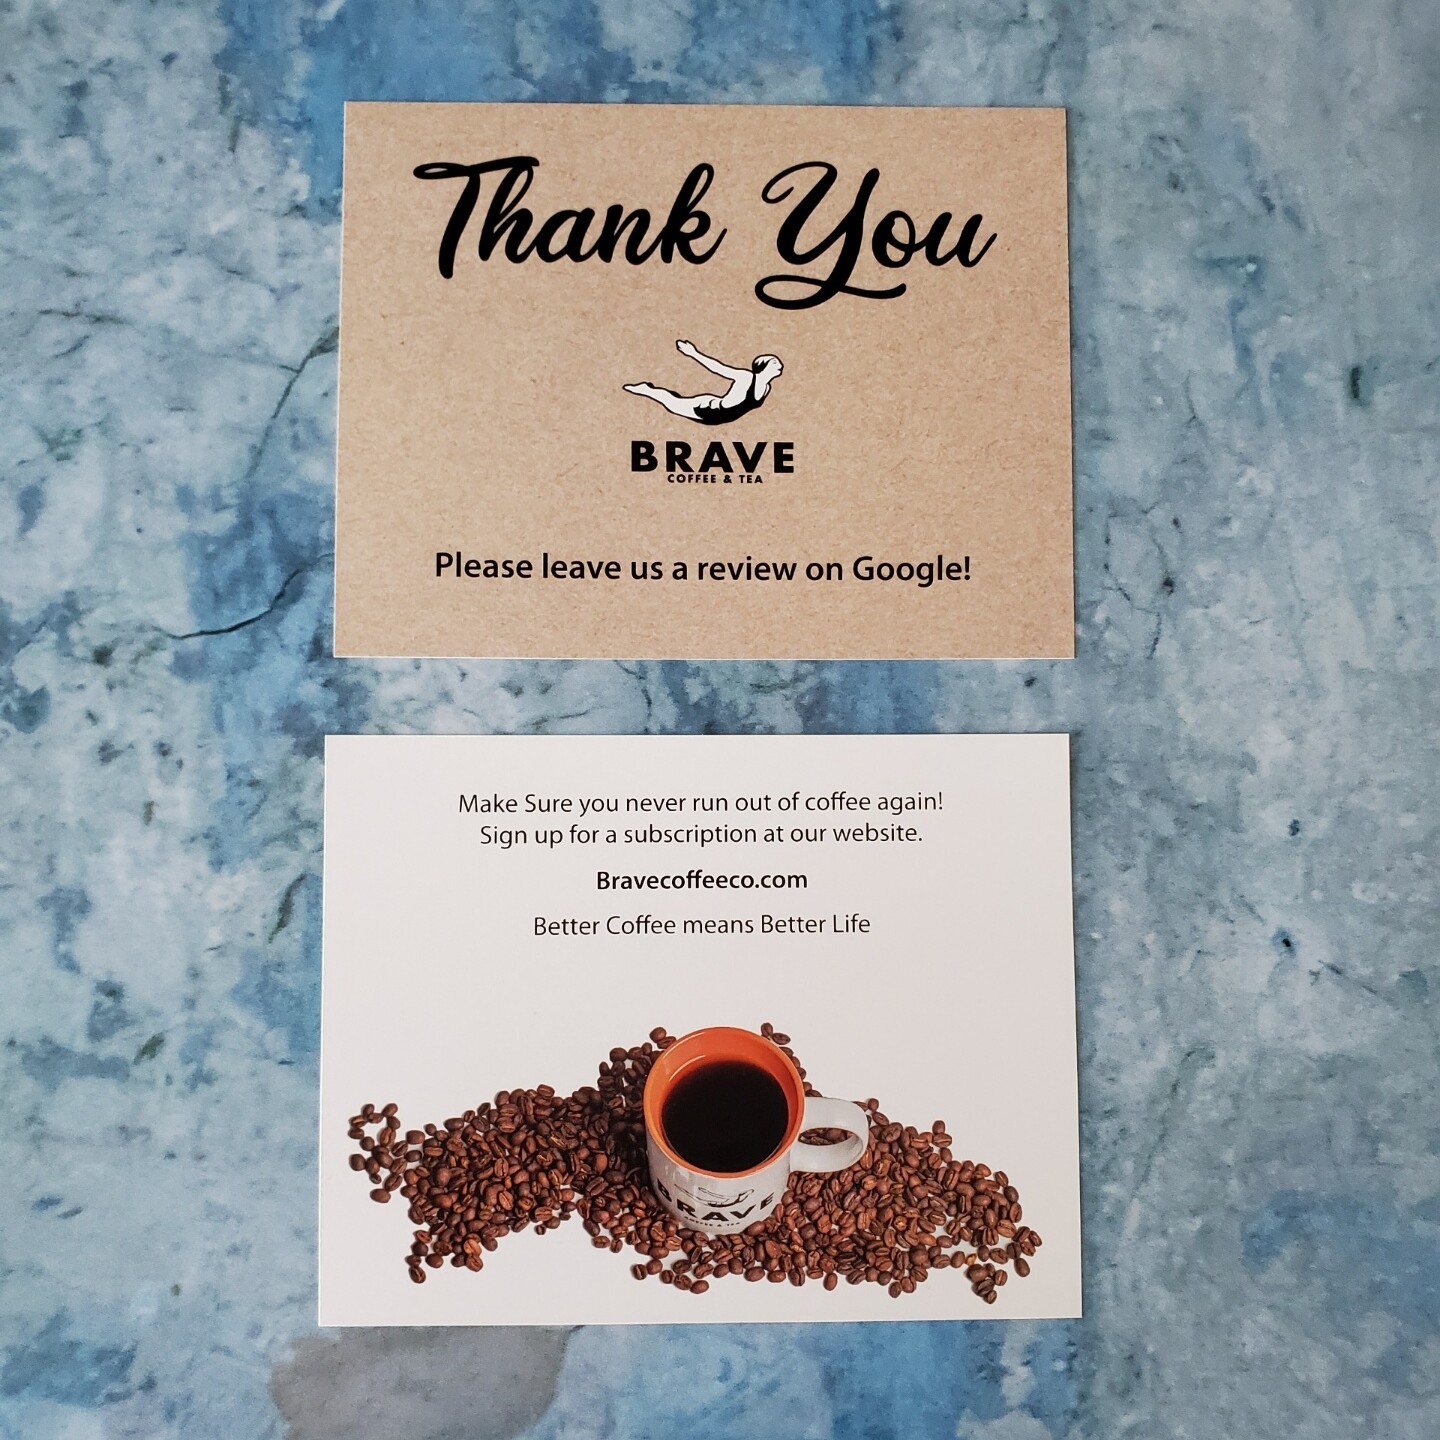 Printed flyer insert for Brave Coffee